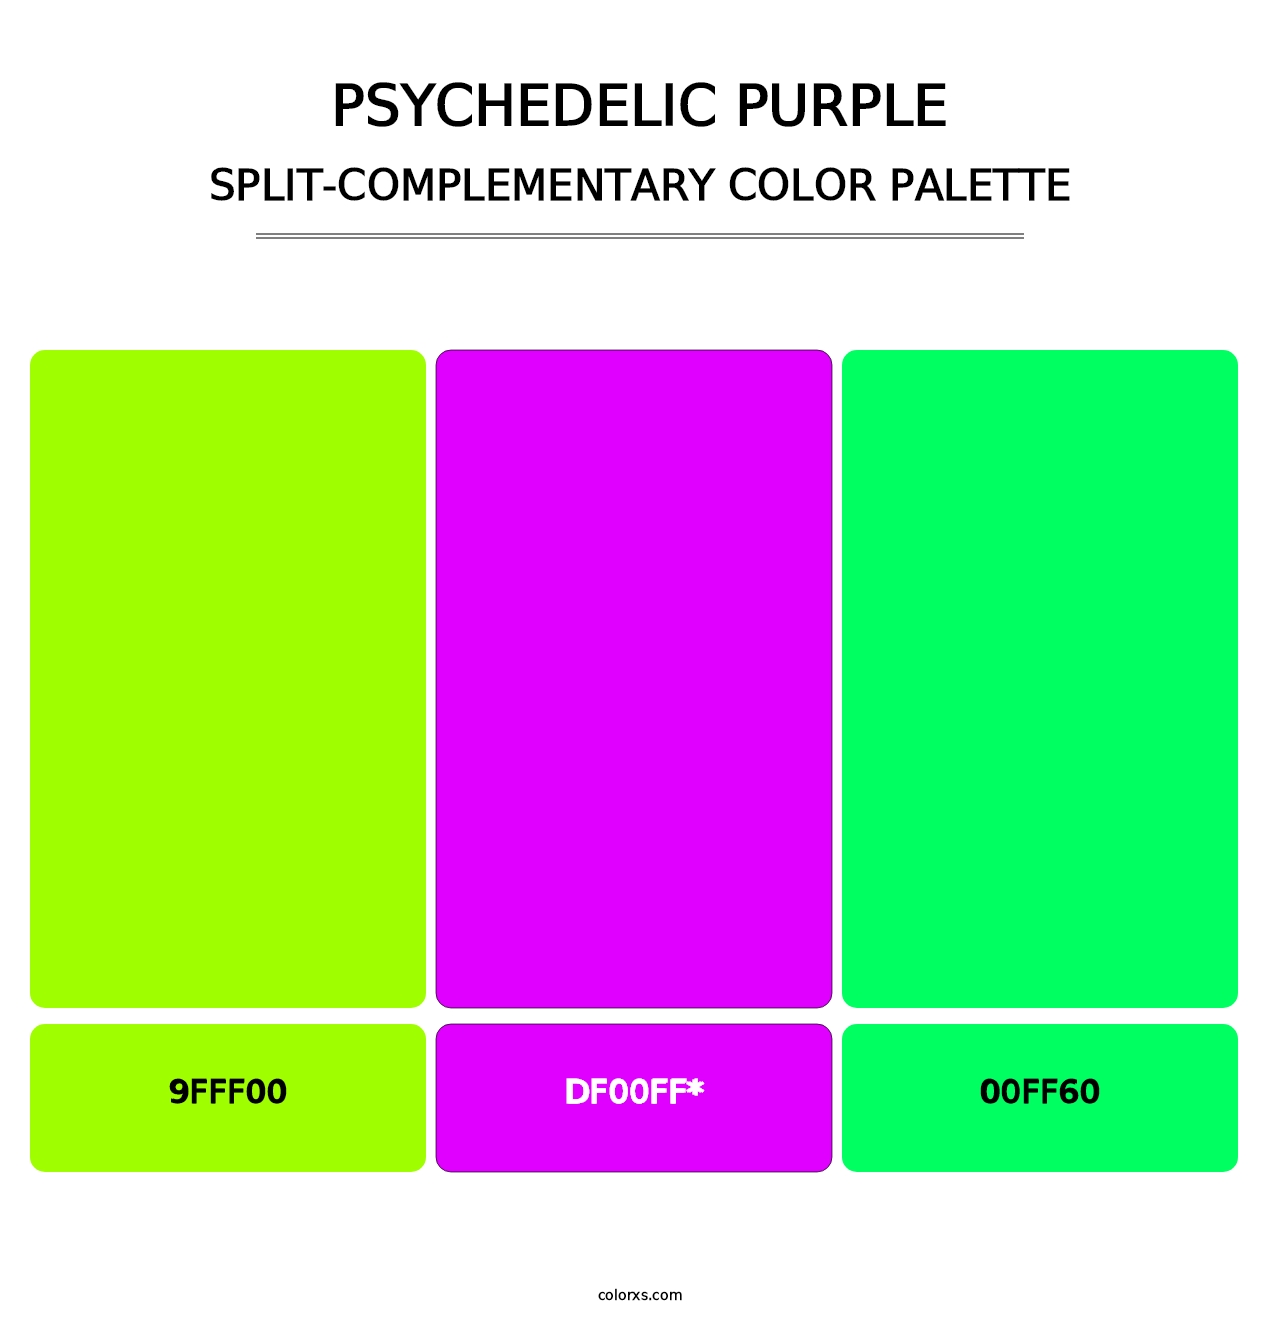 Psychedelic Purple - Split-Complementary Color Palette